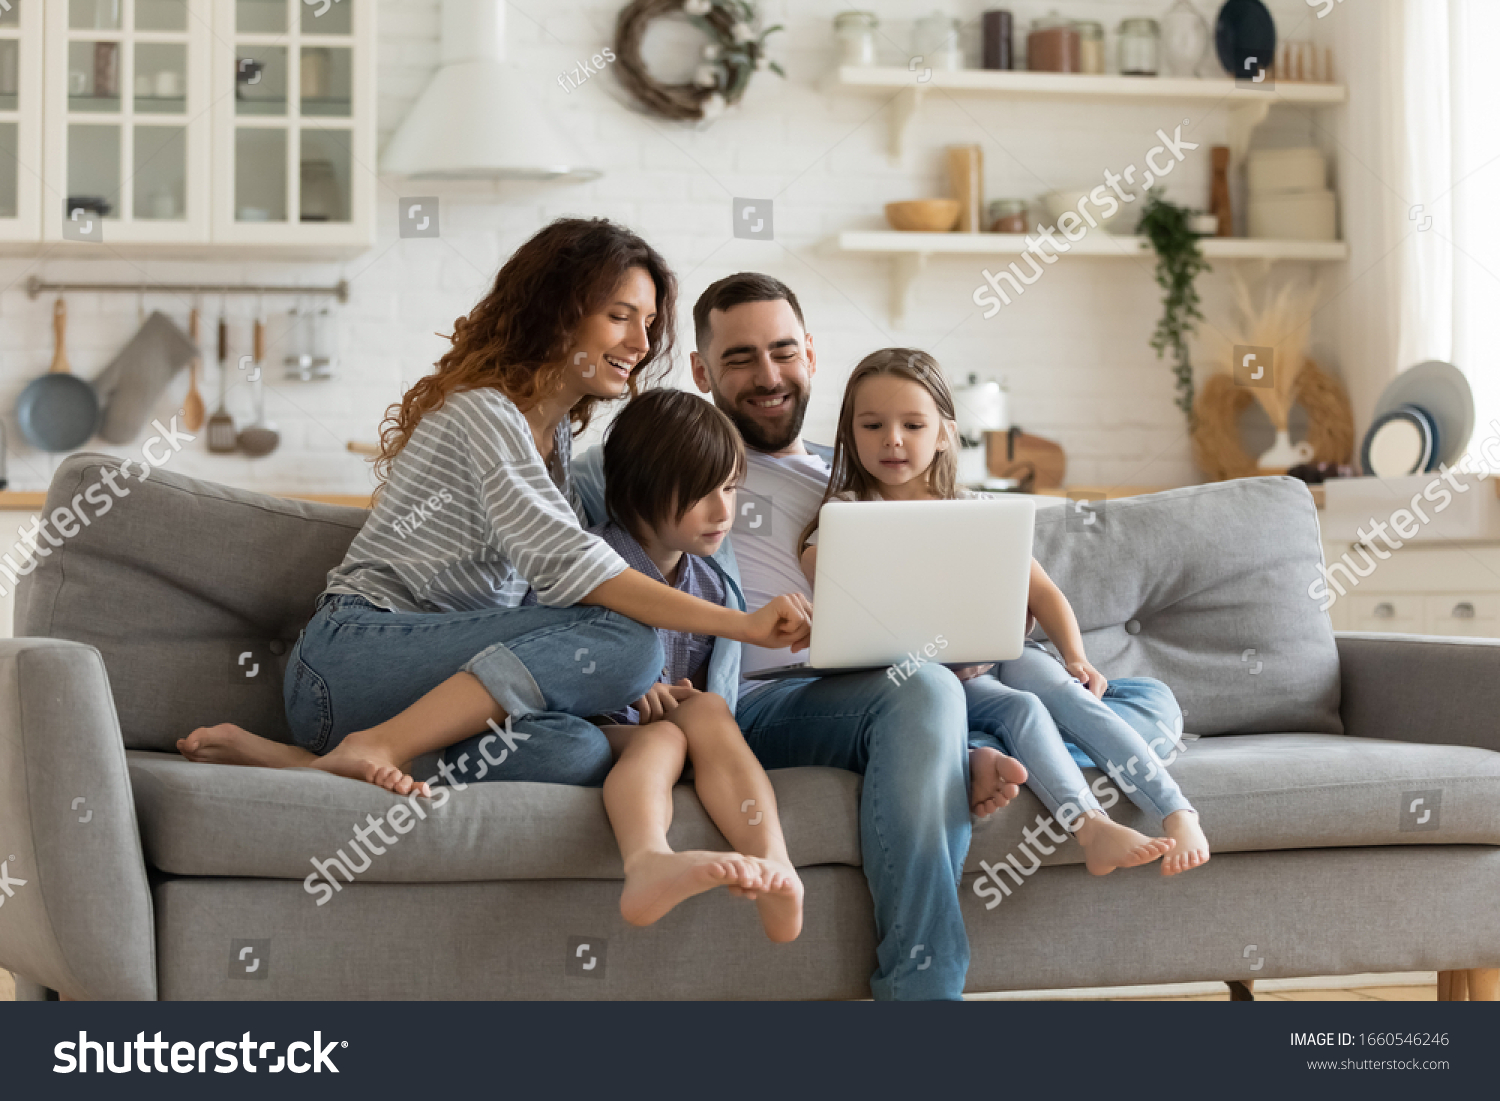 Happy young family with little kids sit on sofa in kitchen have fun using modern laptop together, smiling parents rest on couch enjoy weekend with small children laugh watch video on computer at home #1660546246